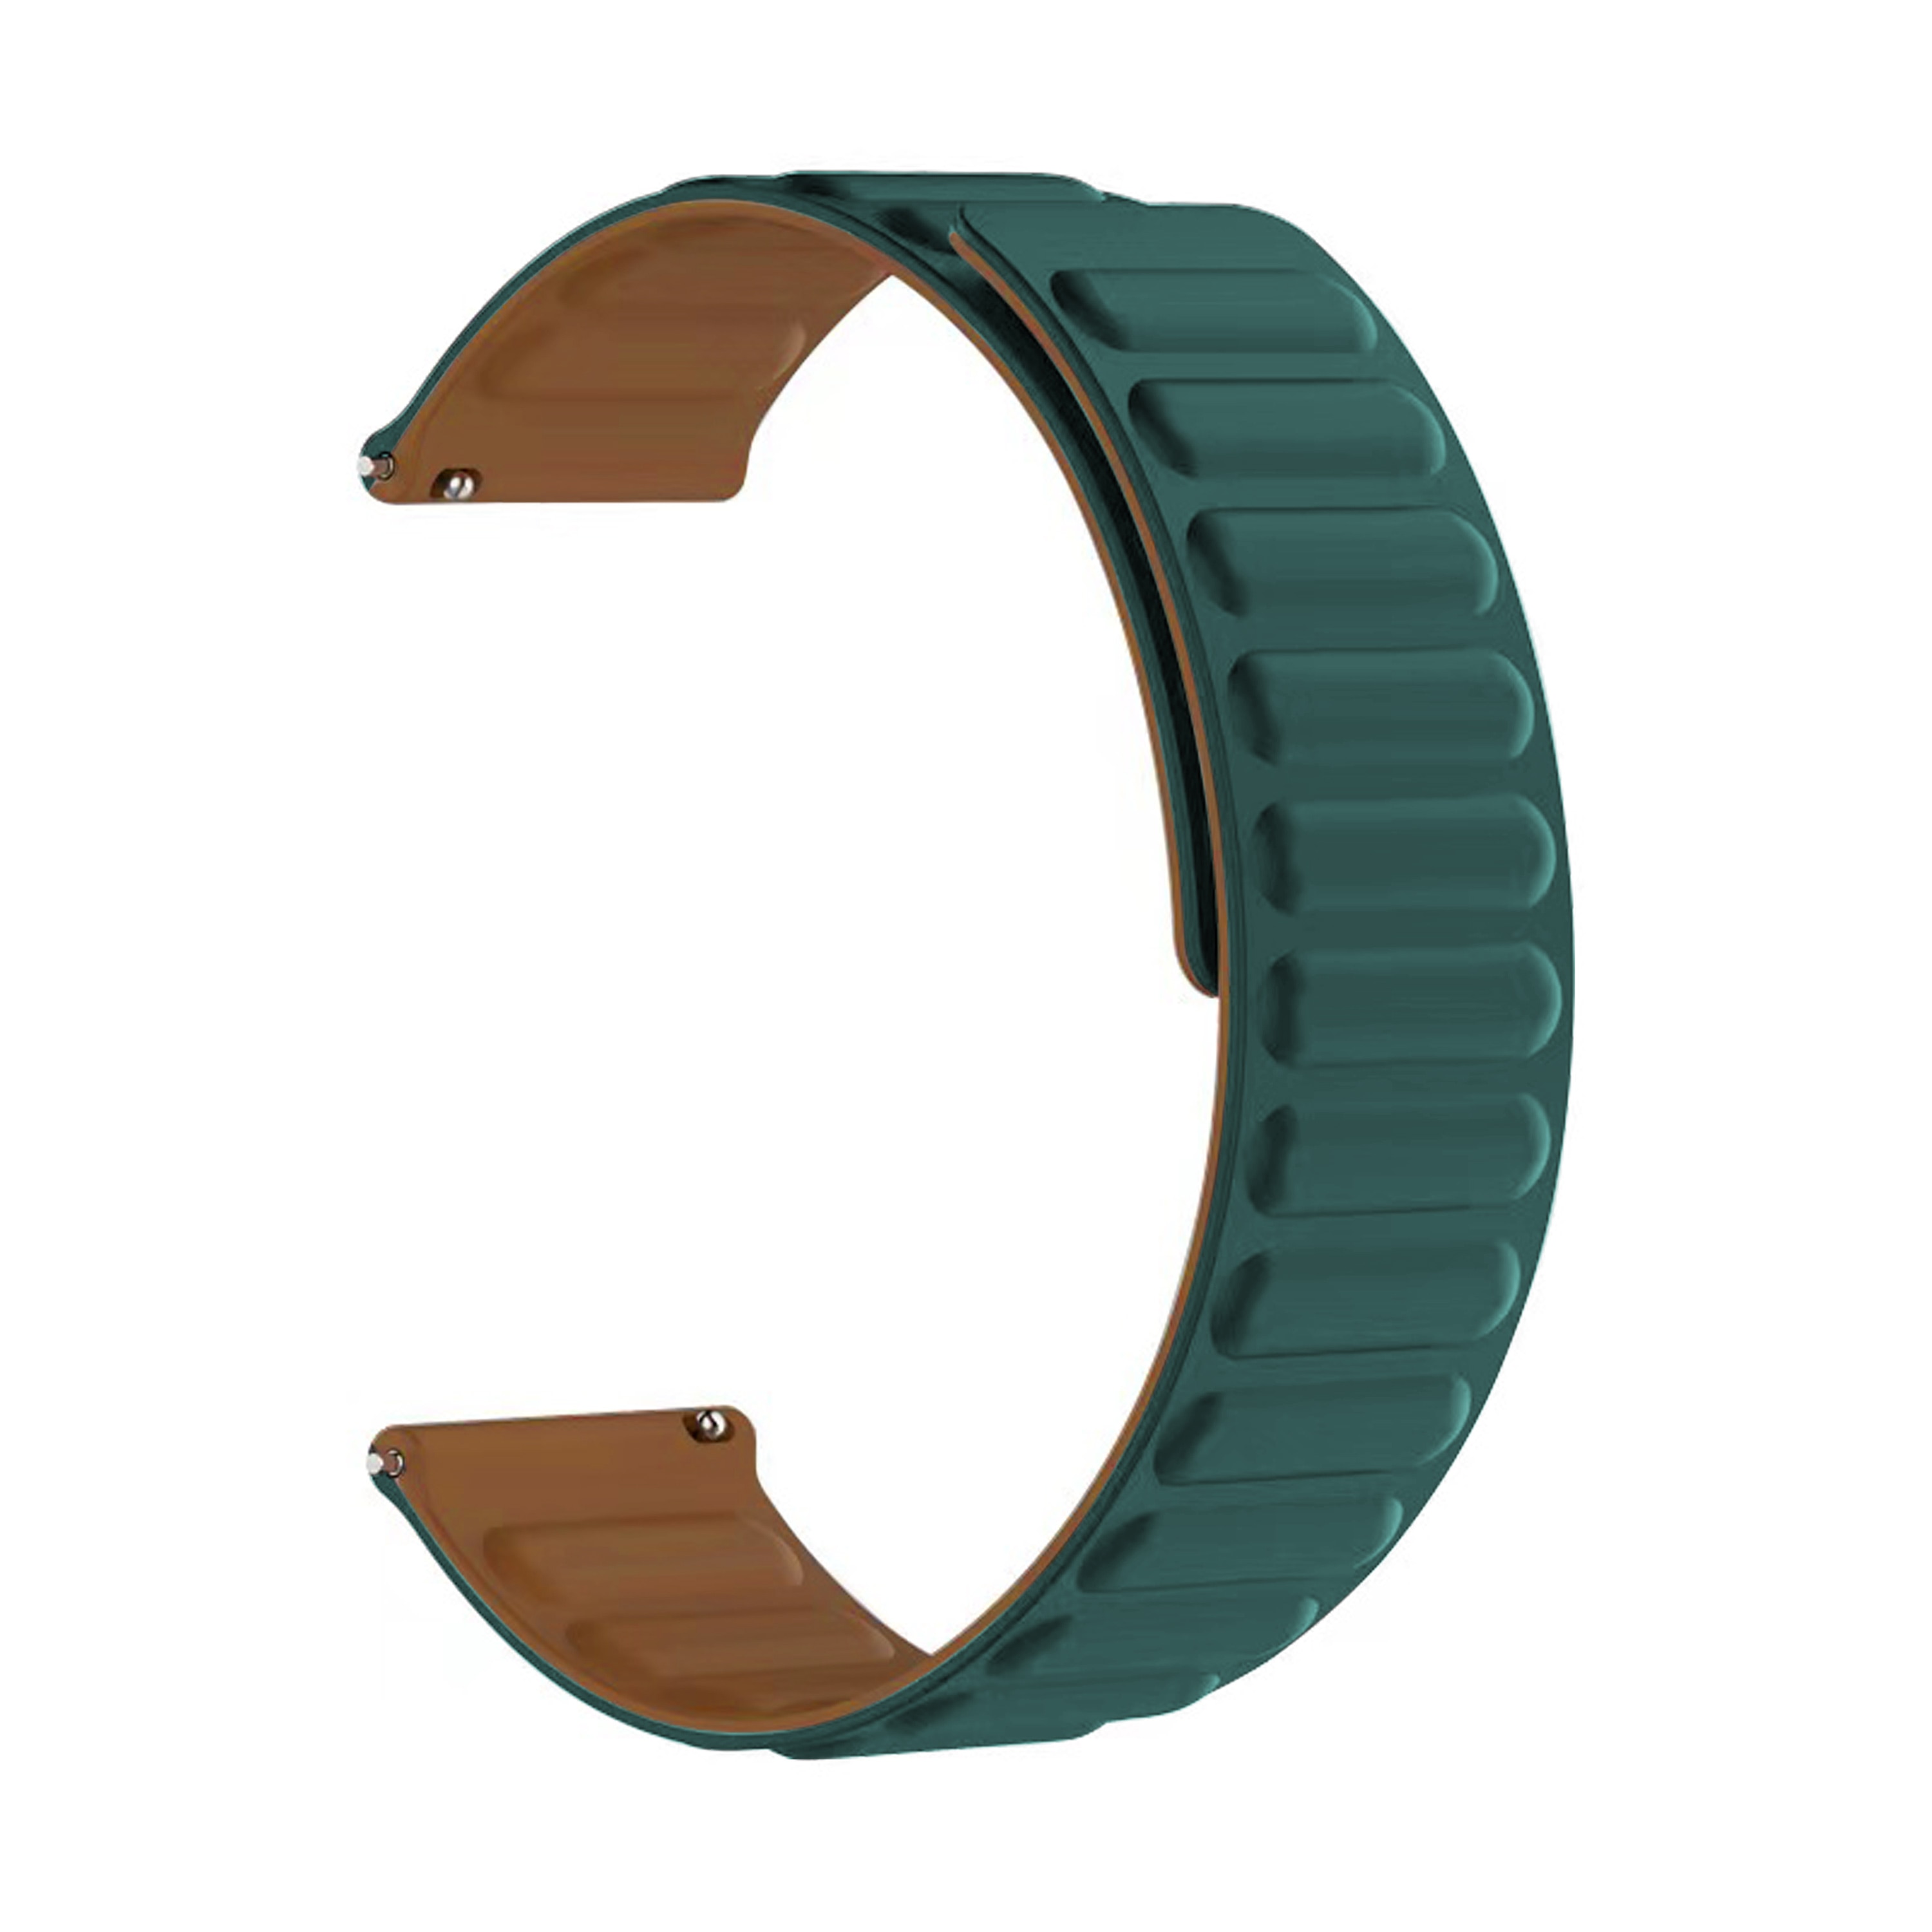 Mibro C2 Magnetic Silicone Band Green